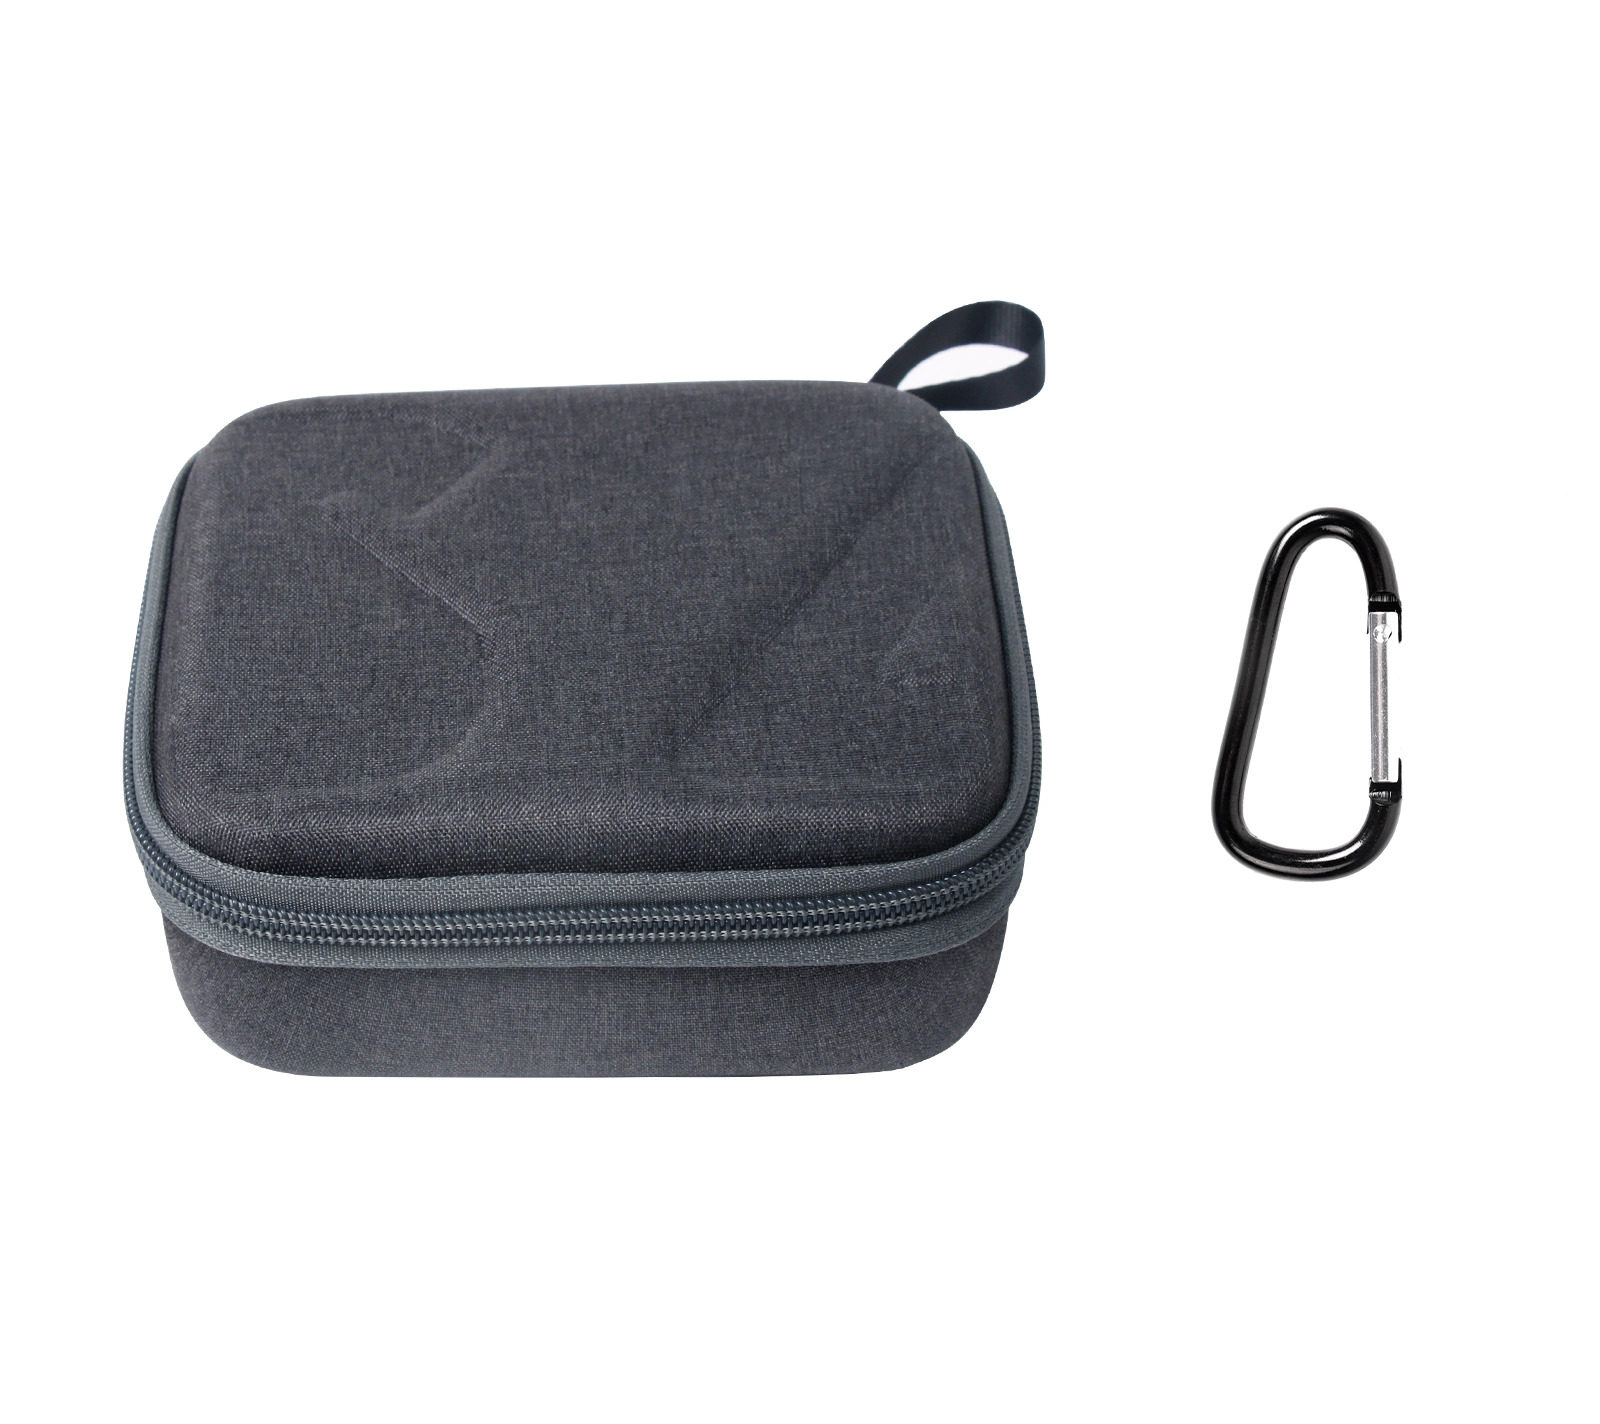 Carrying Case Storage Bag for ACTION 2